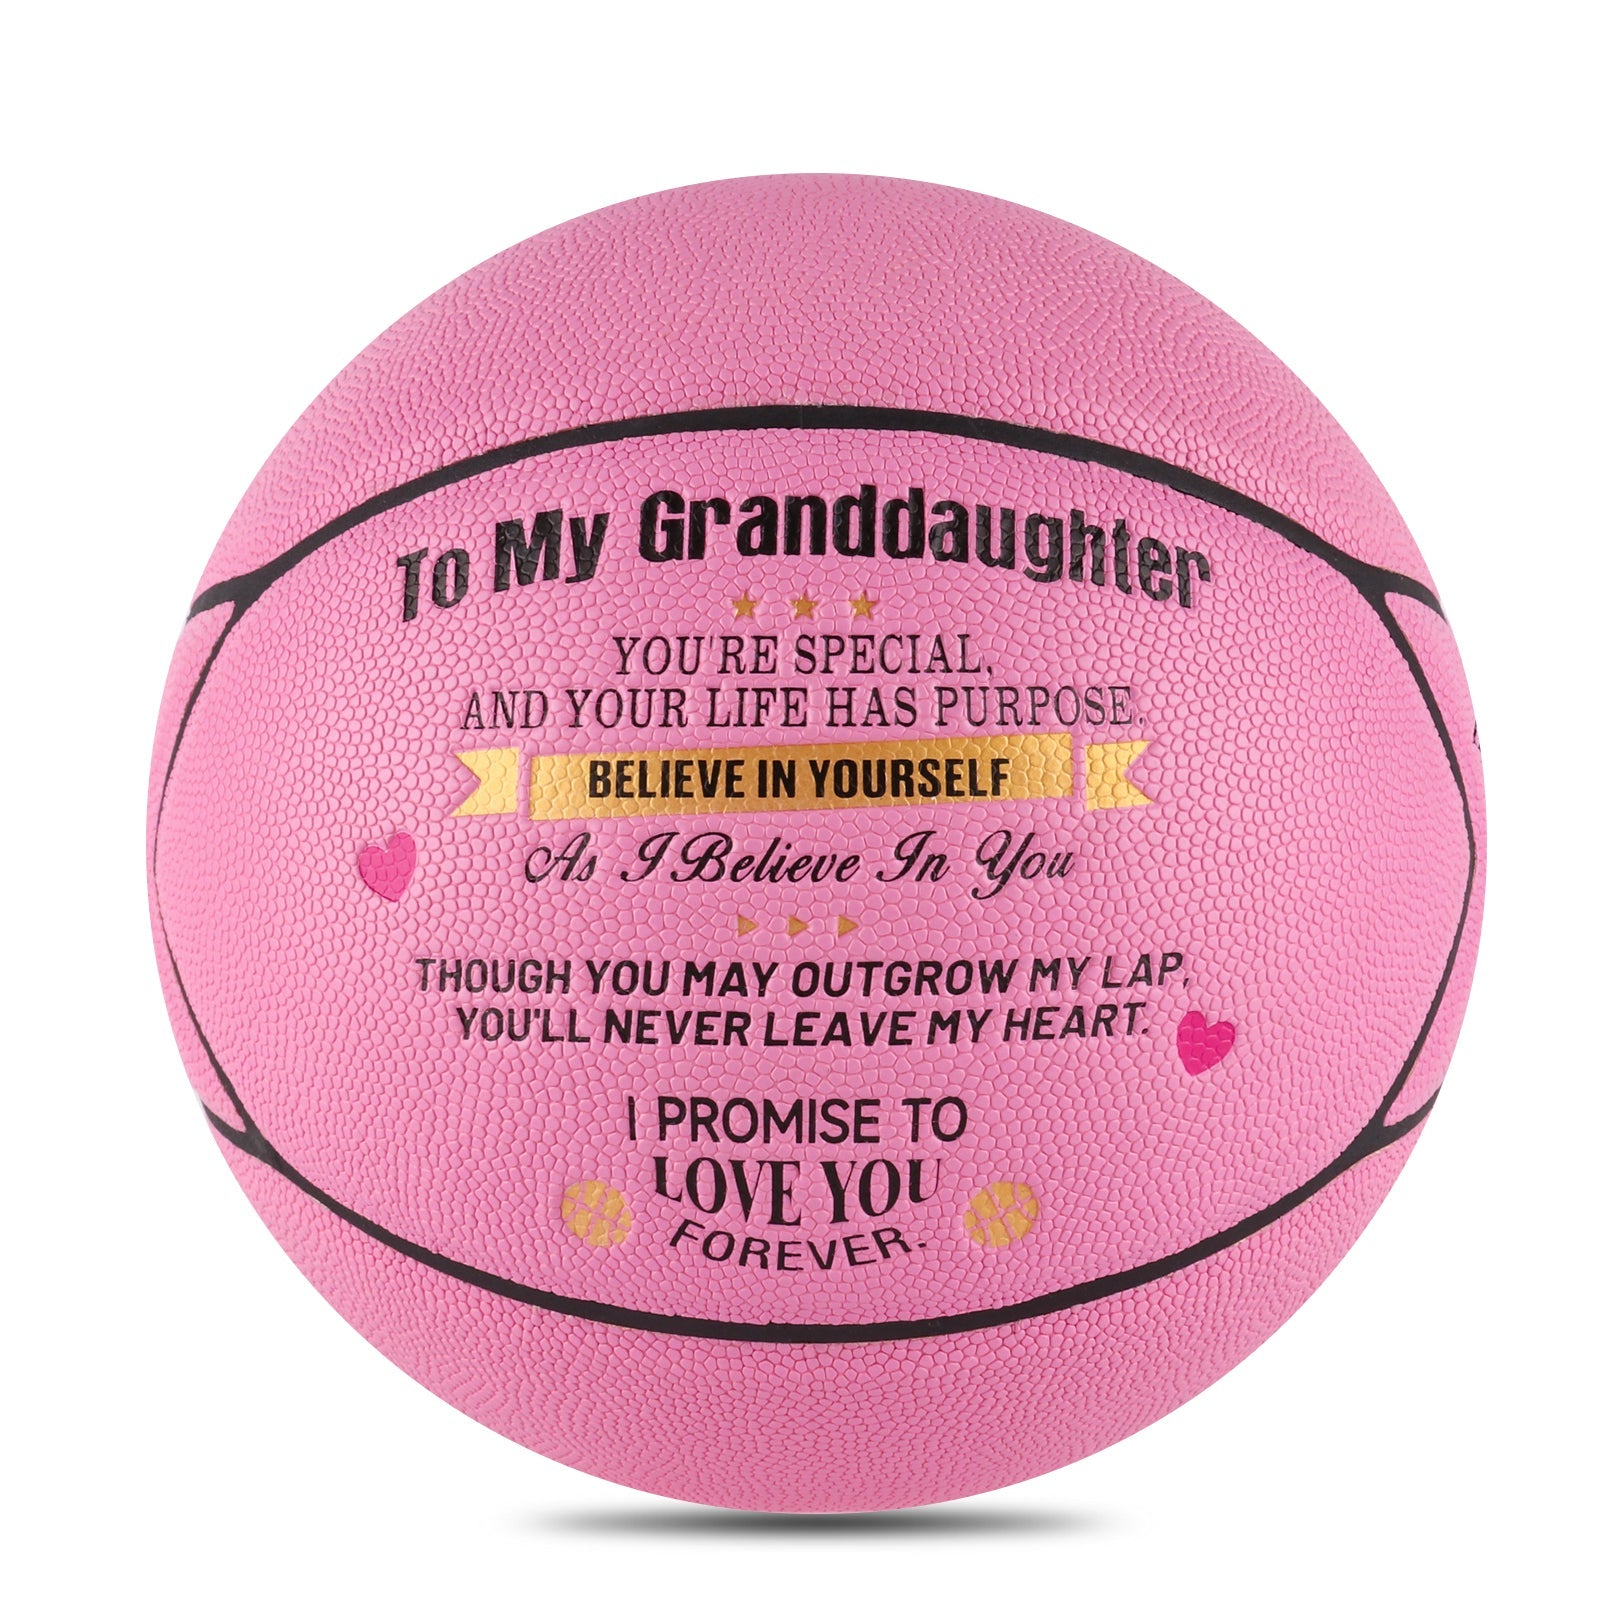 Personalized Letter Basketball For Granddaughter, Basketball Indoor/Outdoor Game Ball For Girl, Birthday Christmas Gift For Granddaughter, Pink - Family Watchs